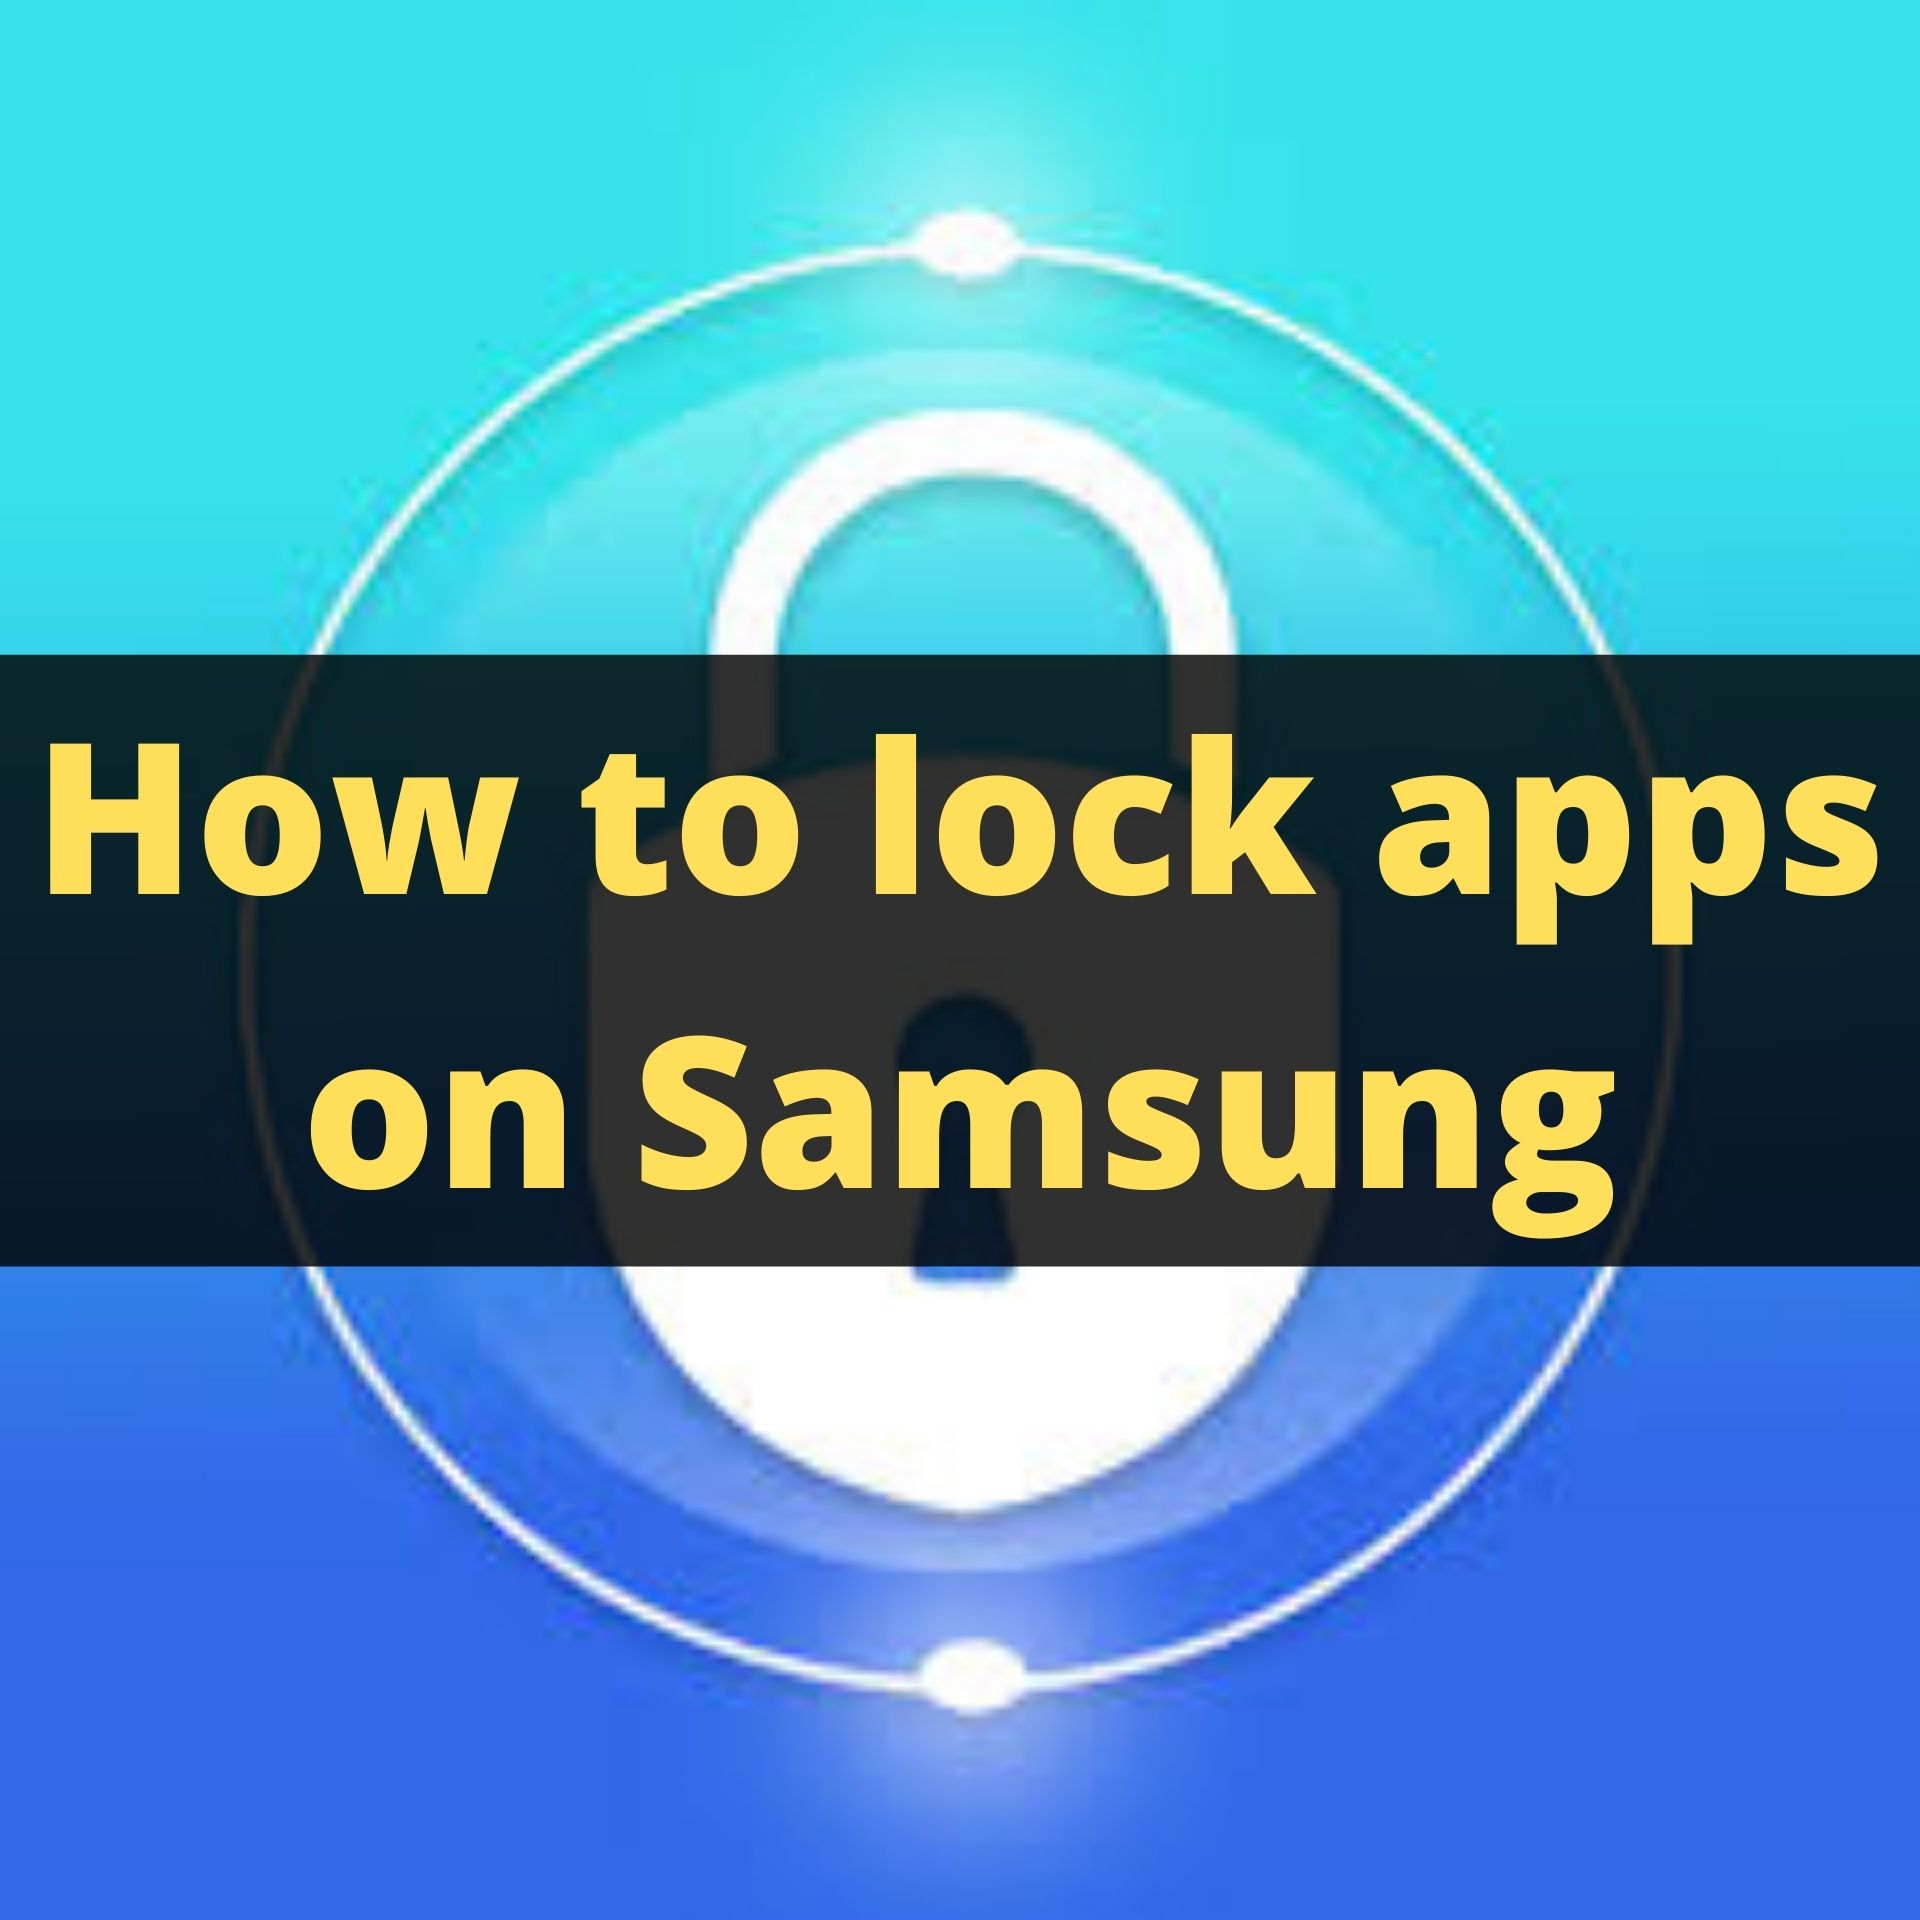 How to lock apps on Samsung (1)